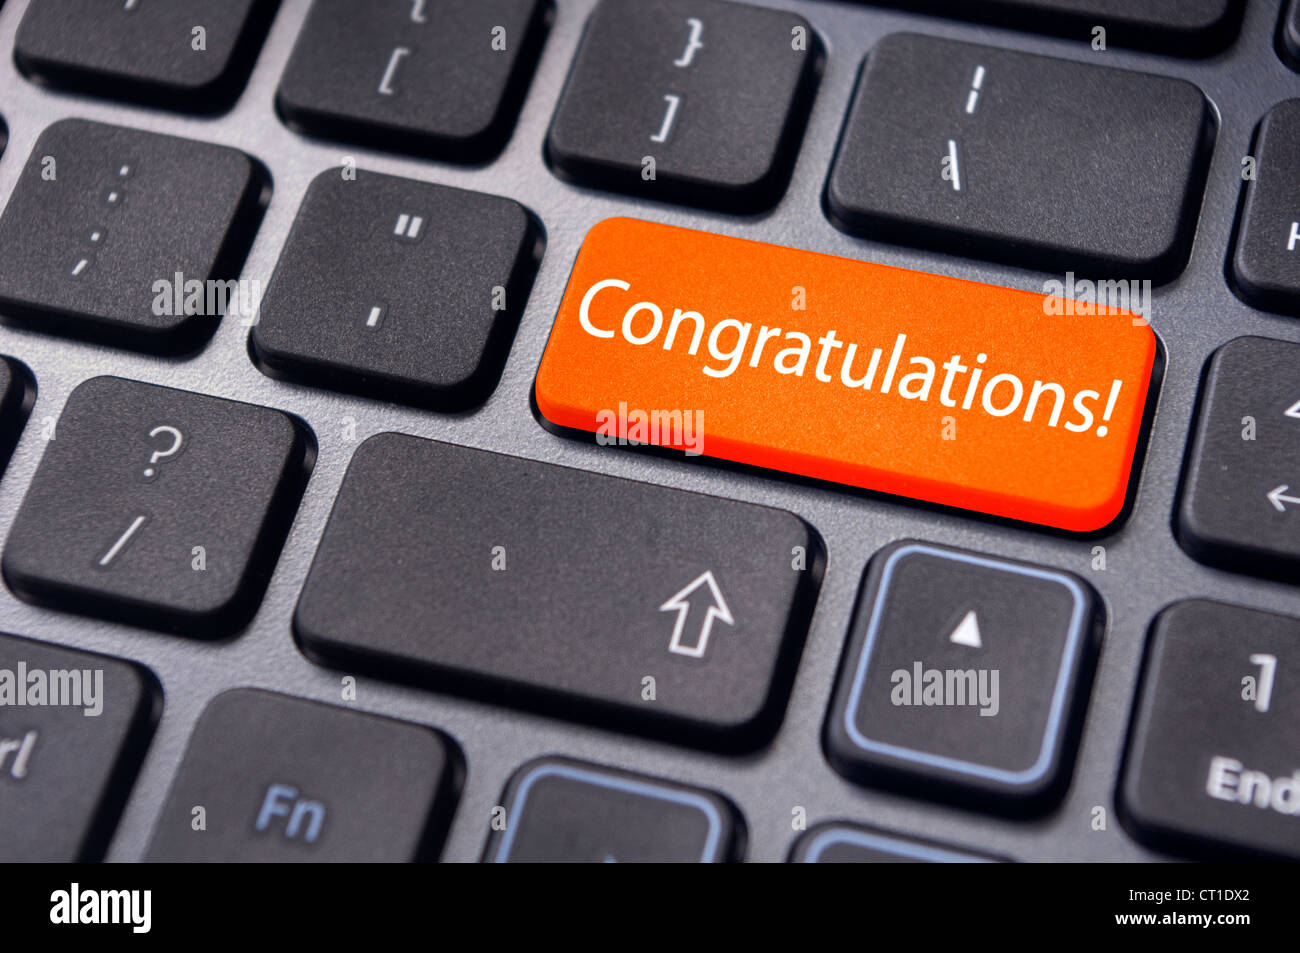 a congratulations message on enter key of keyboard. Stock Photo